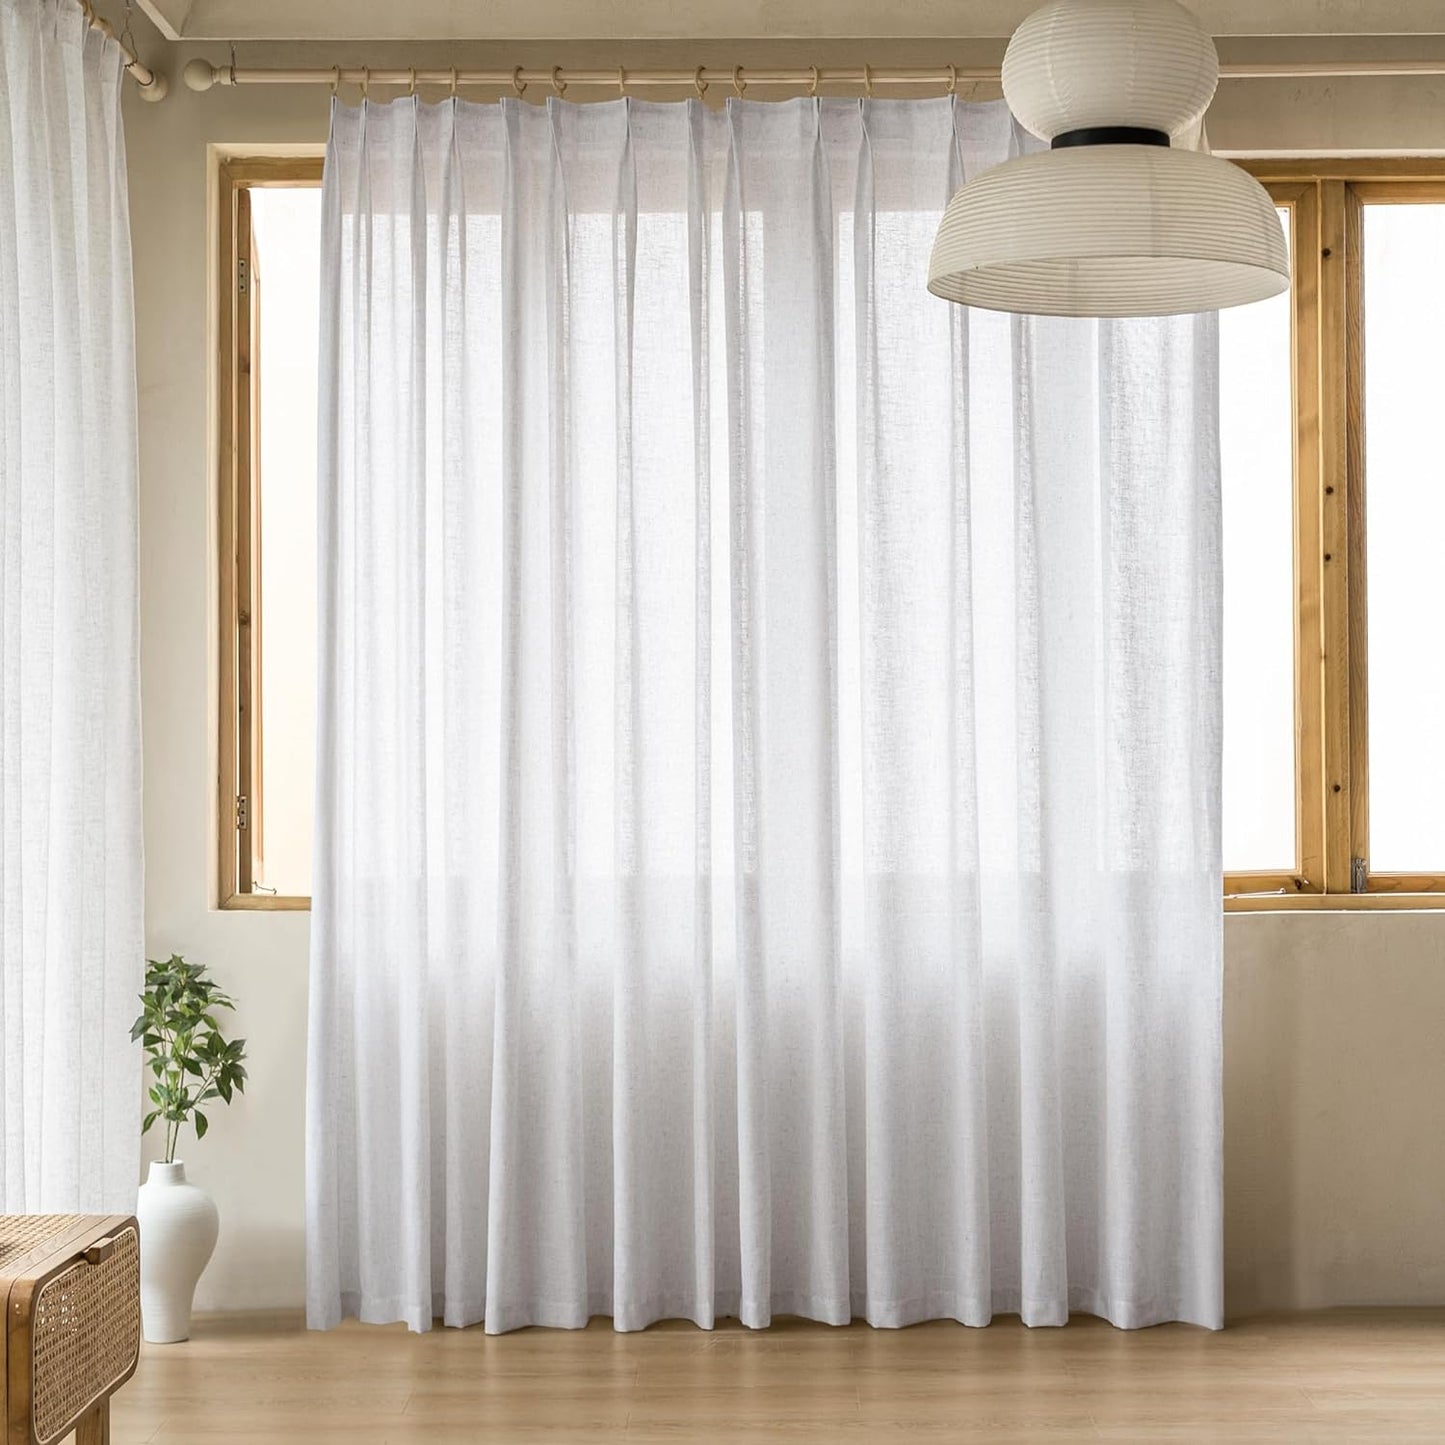 MAIHER Extra Wide Faux Linen Curtains Pinch Pleated, 108 Inches Long Light Filtering Semi Sheer Curtains Patio Door for Living Room, Pinch Pleat Drapes with Hooks (1 Panel, 84" W X 108" L)  MAIHER Beige White 54X96 